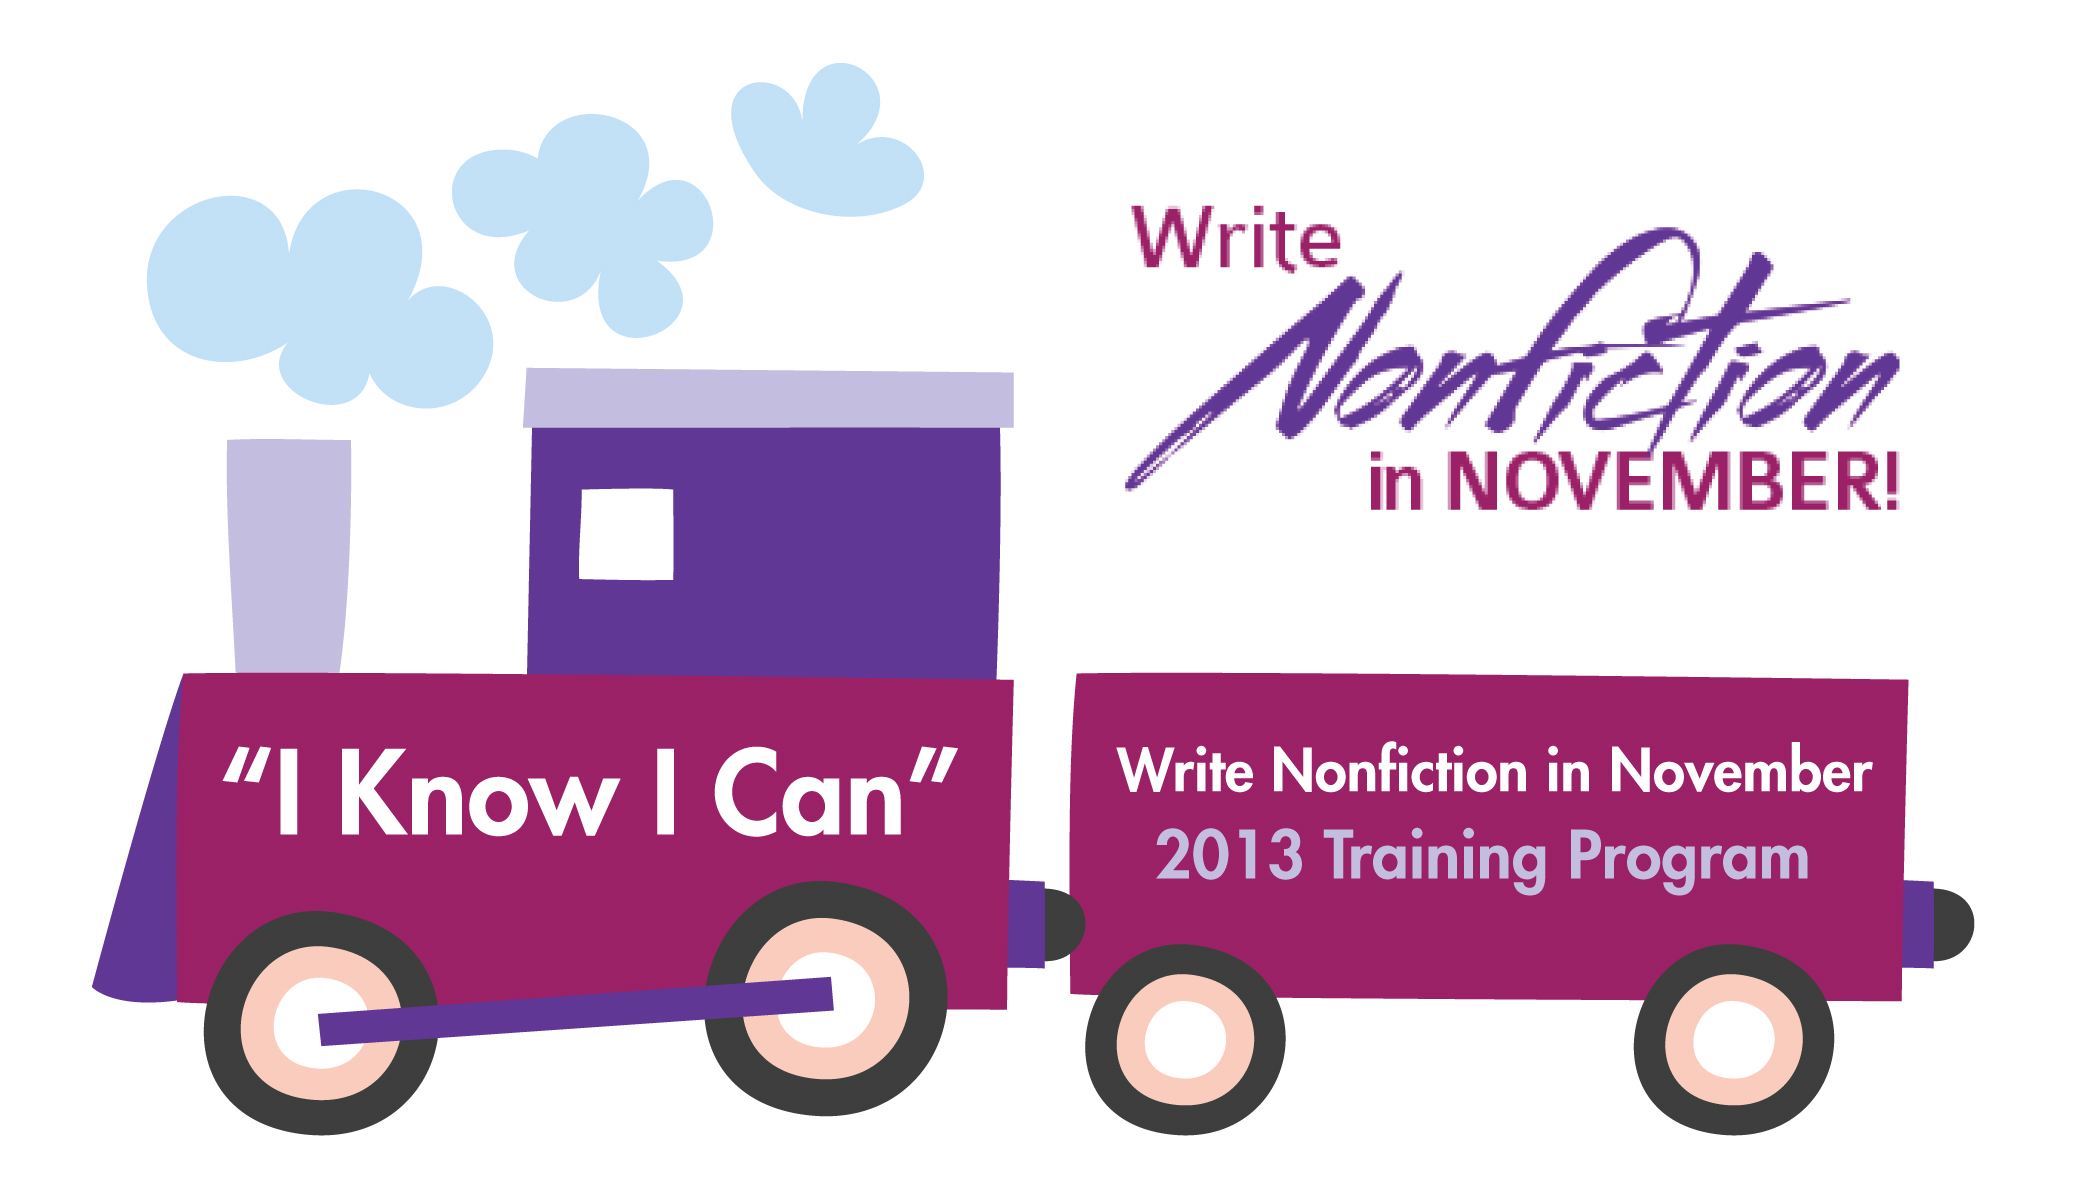 Work i know you can. I know you can. I know i can. Know what i can. Train write.